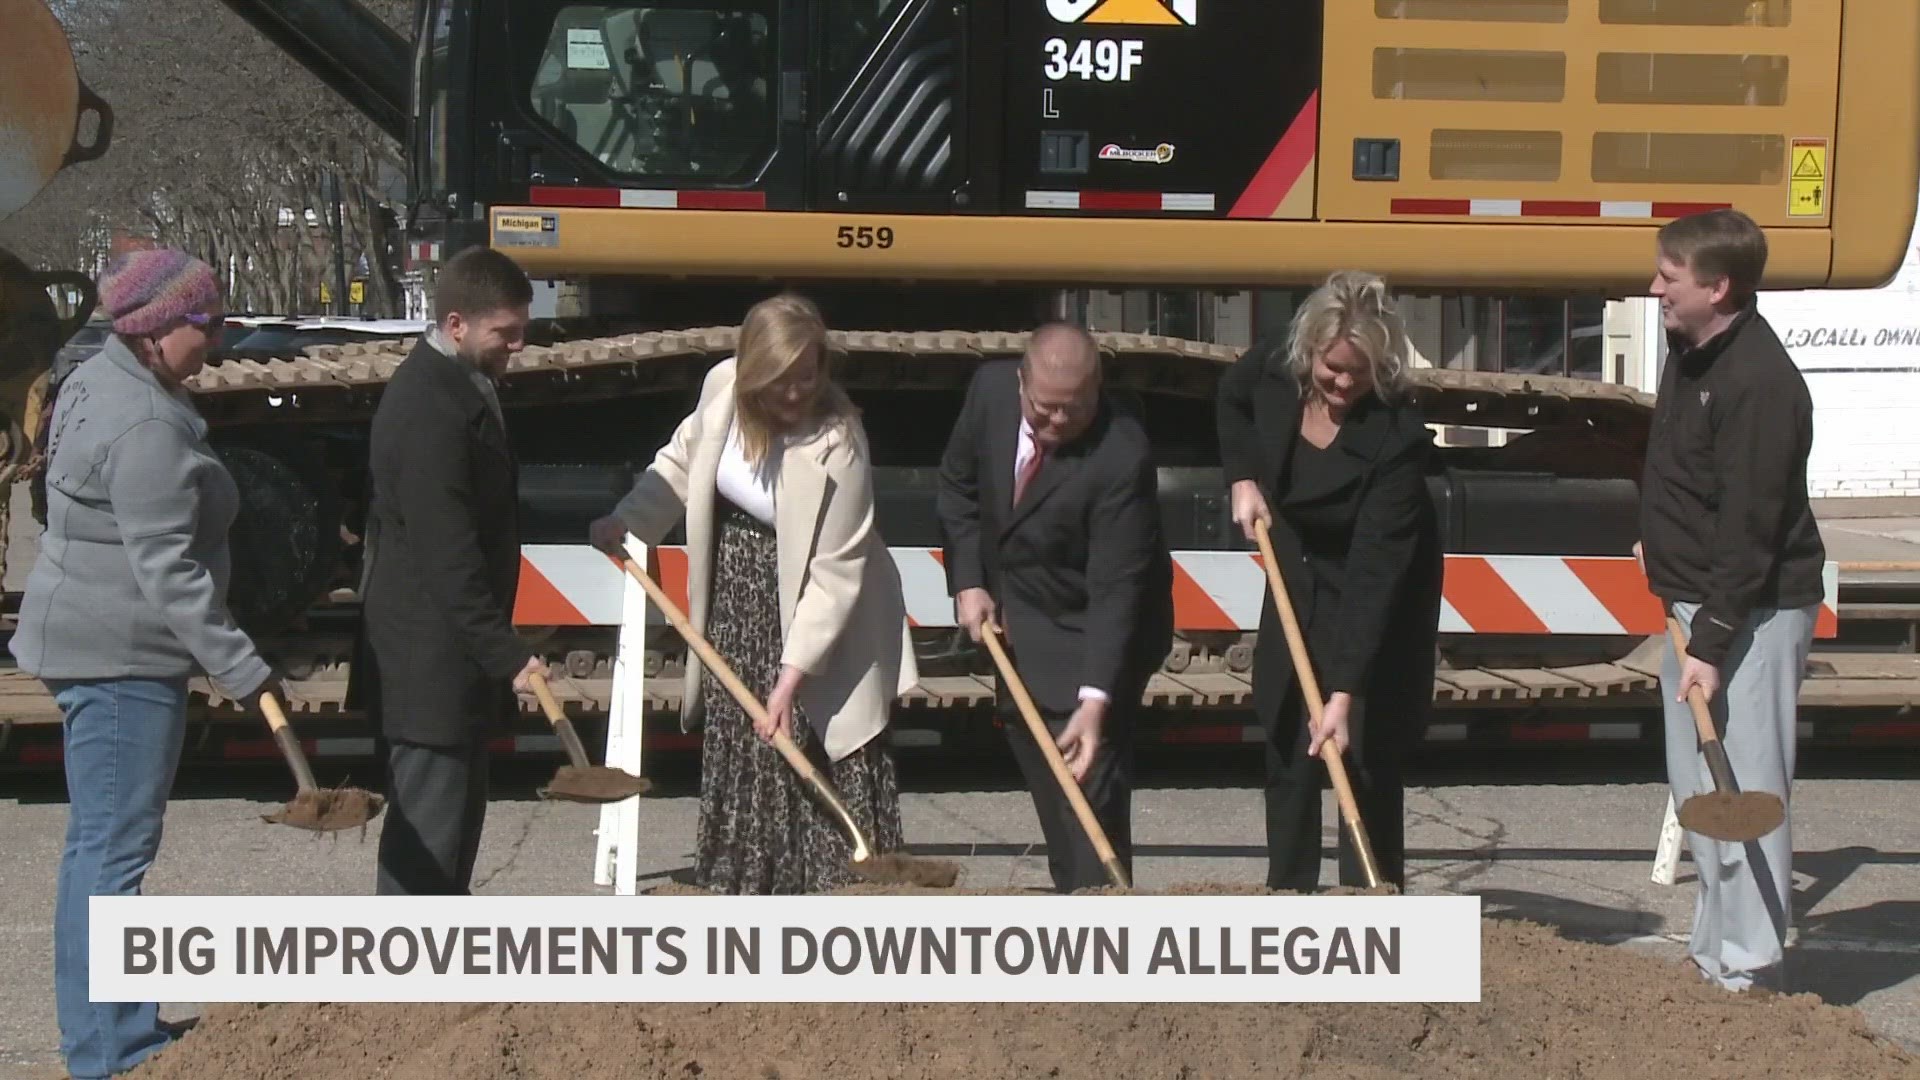 After six years of planning city leaders and developers held a groundbreaking on a new improvement project in Allegan.